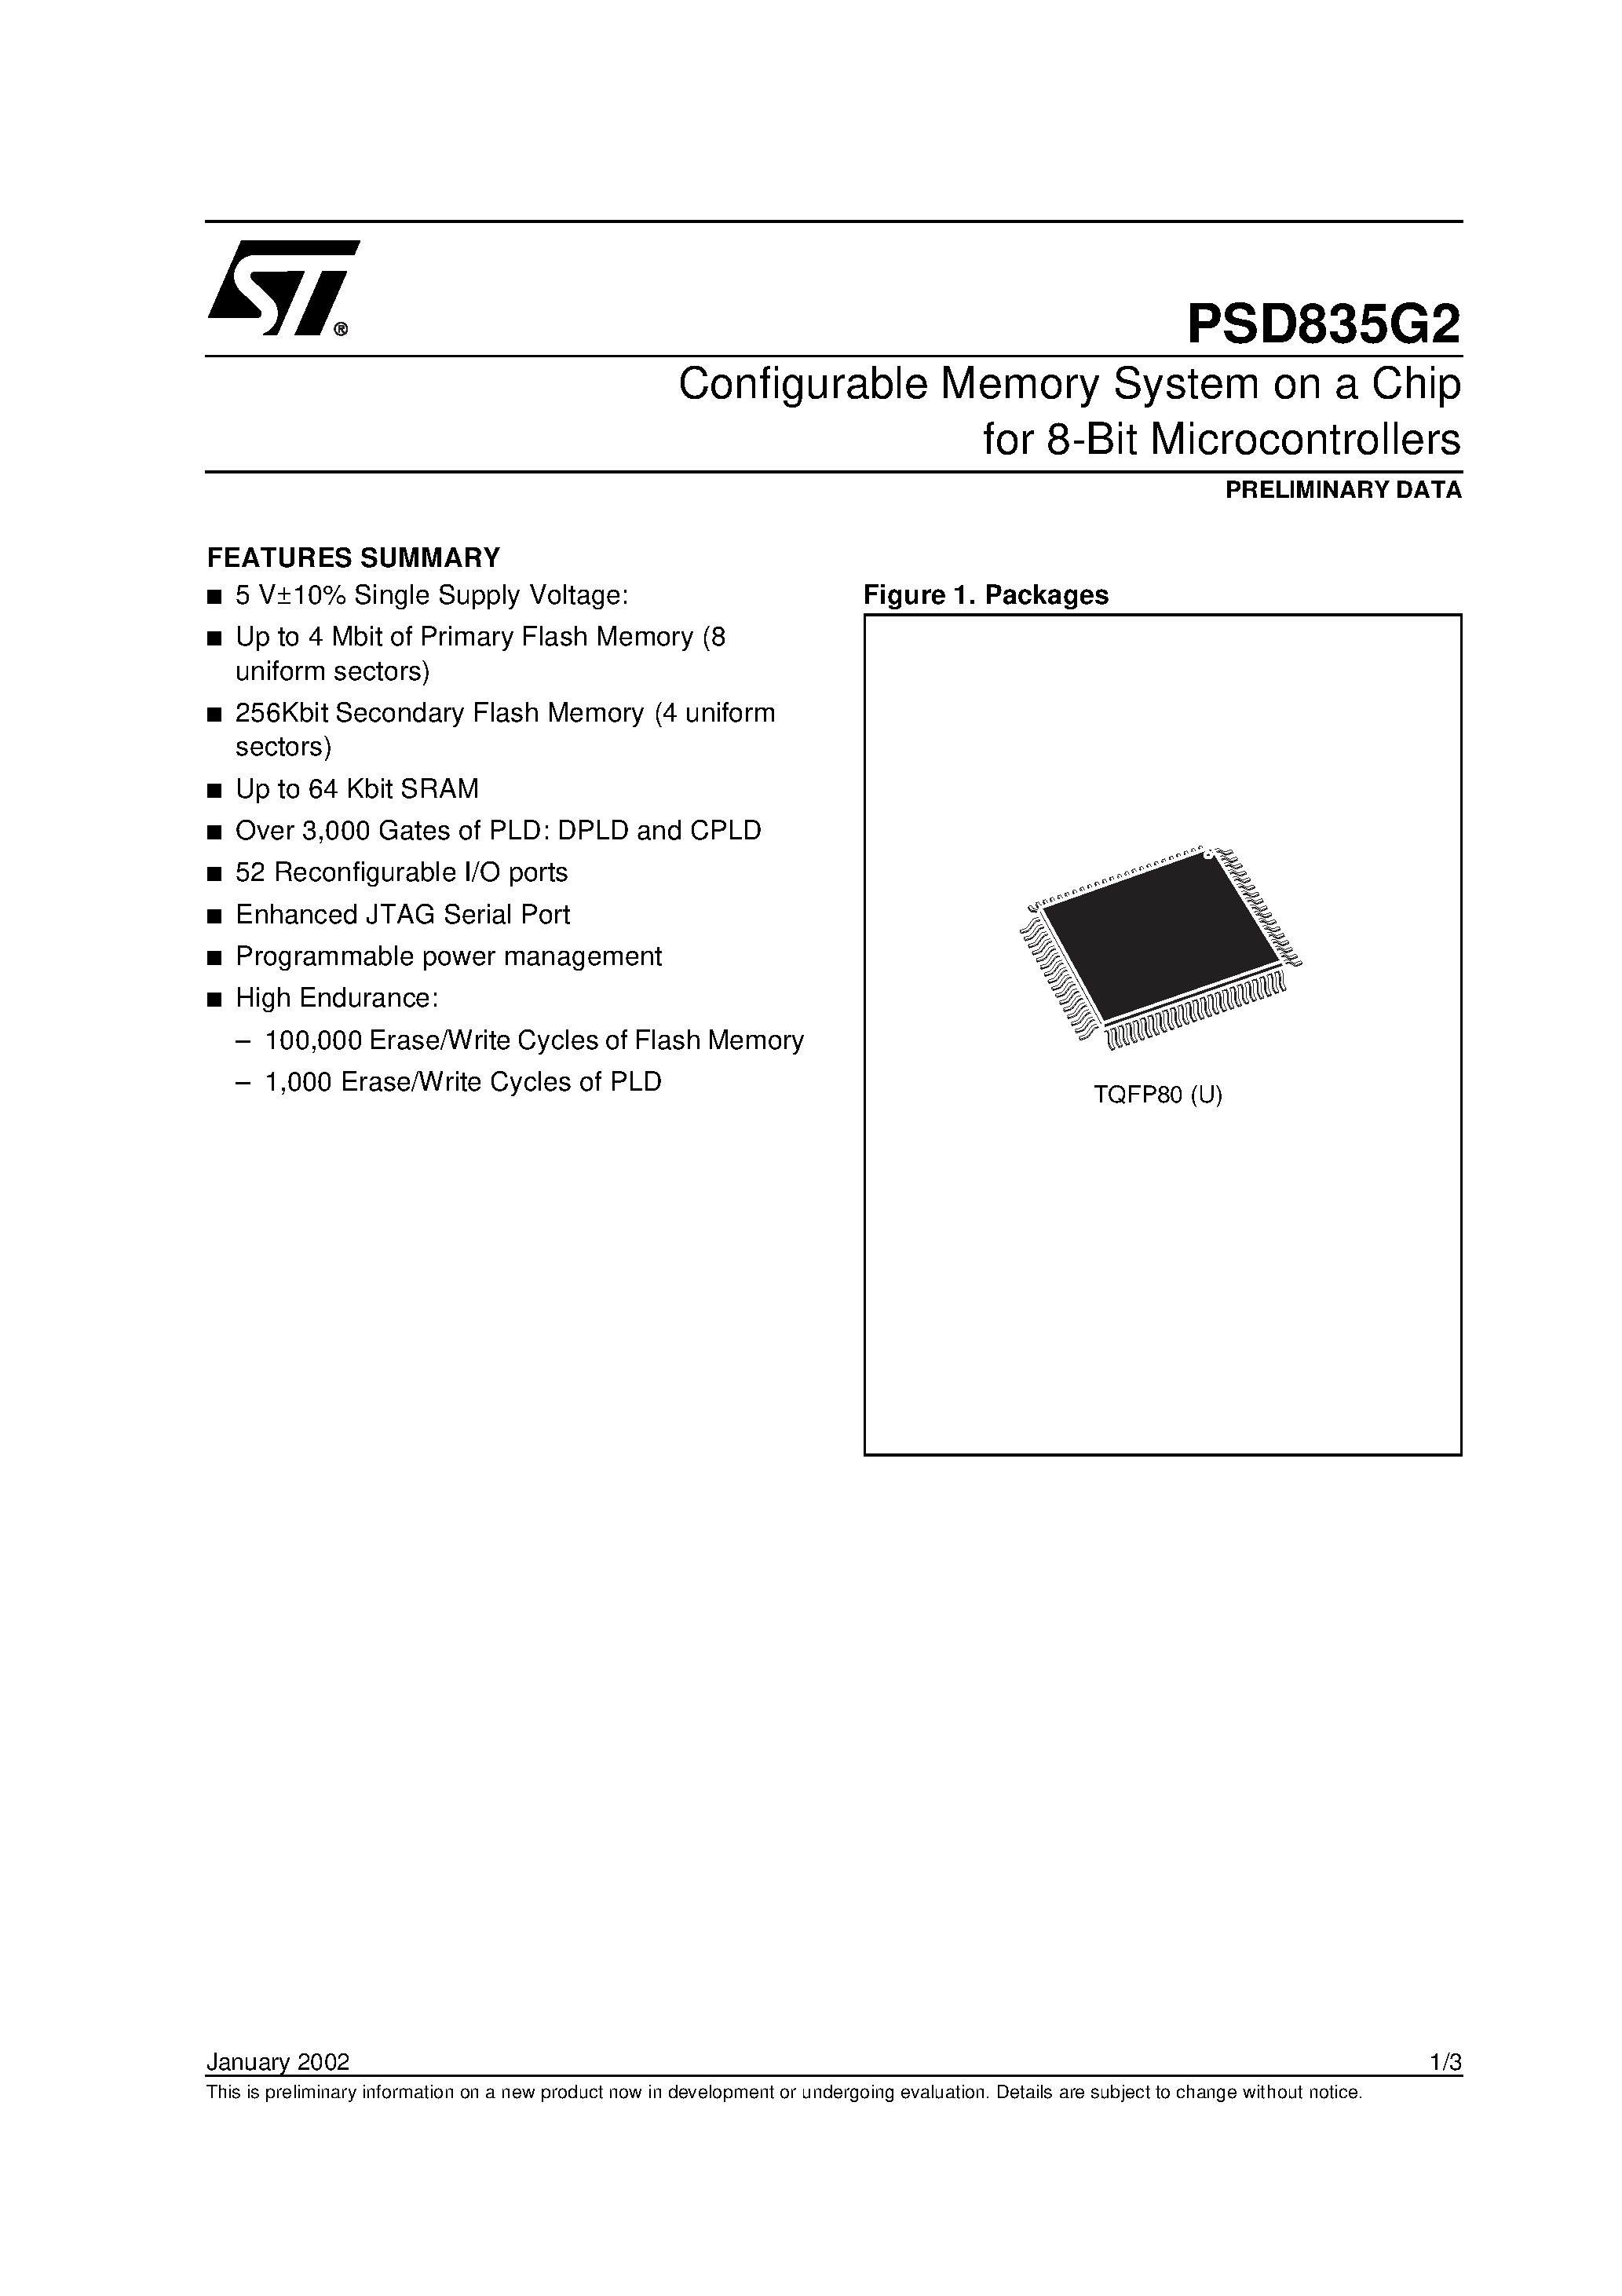 Datasheet PSD835F2-A-12B81I - Configurable Memory System on a Chip for 8-Bit Microcontrollers page 1